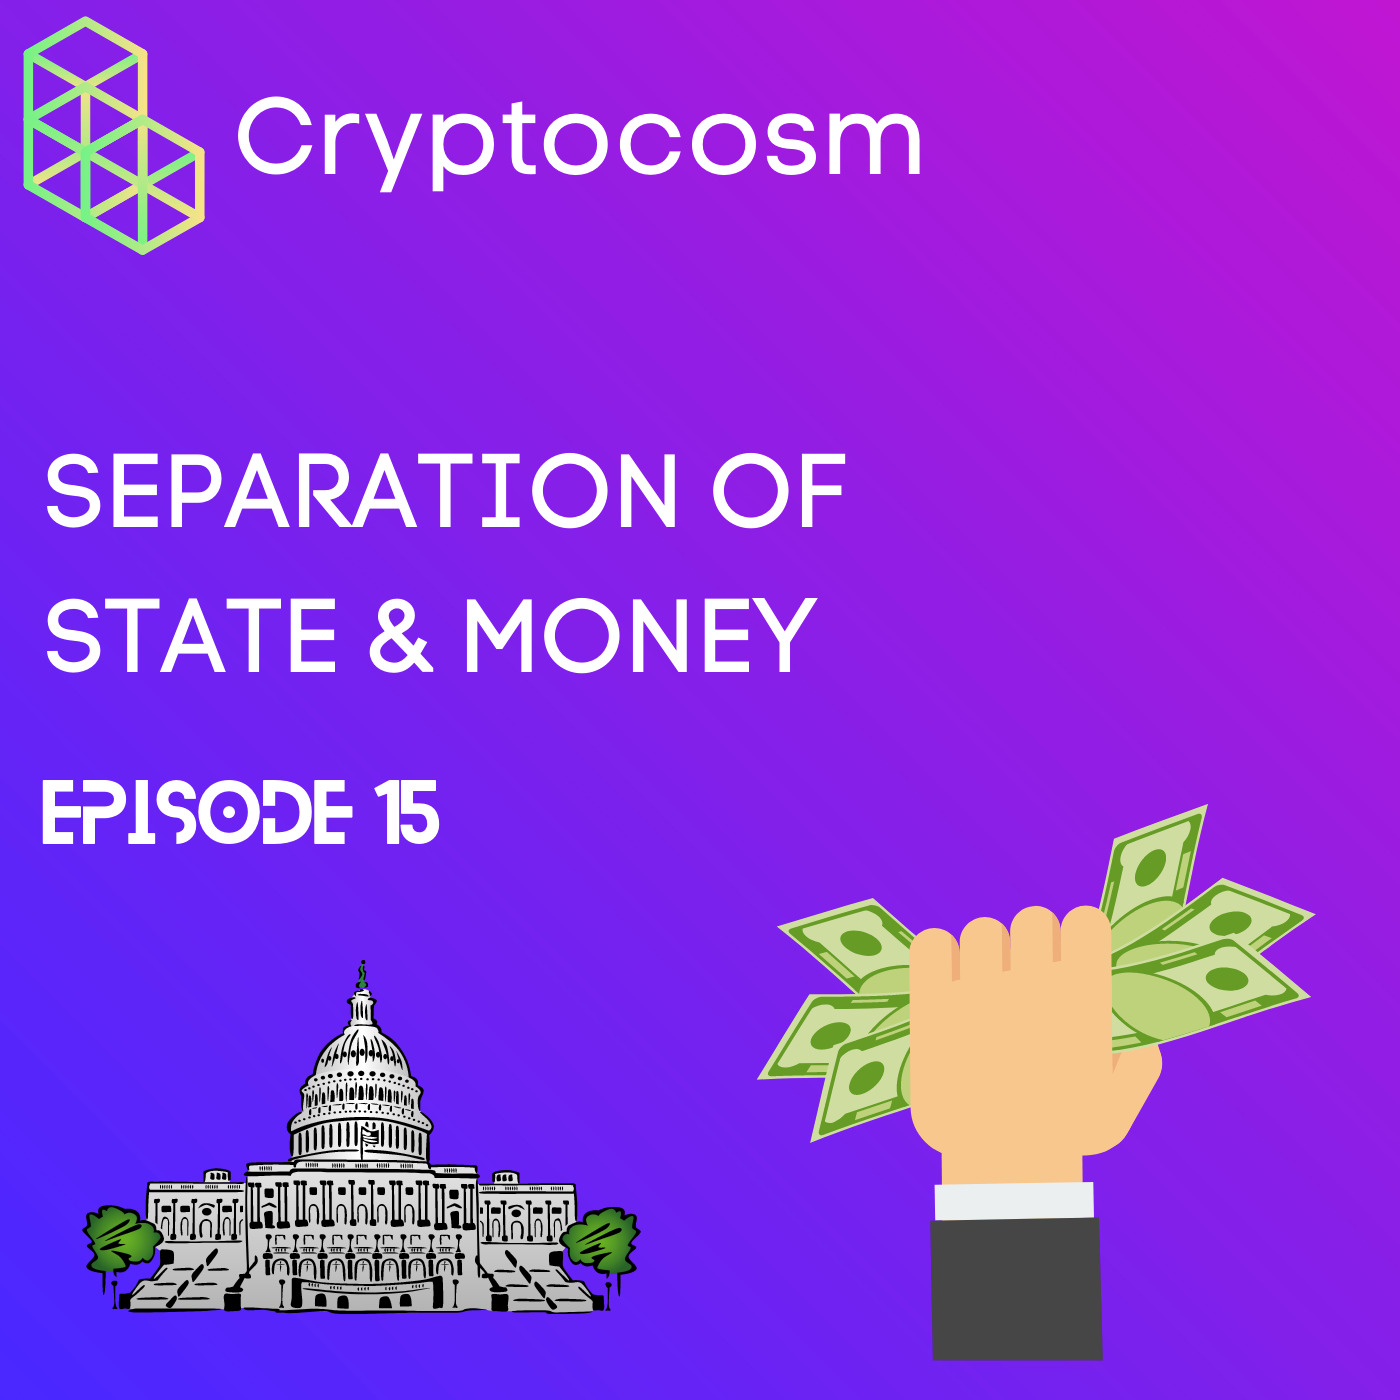 Separation of State & Money